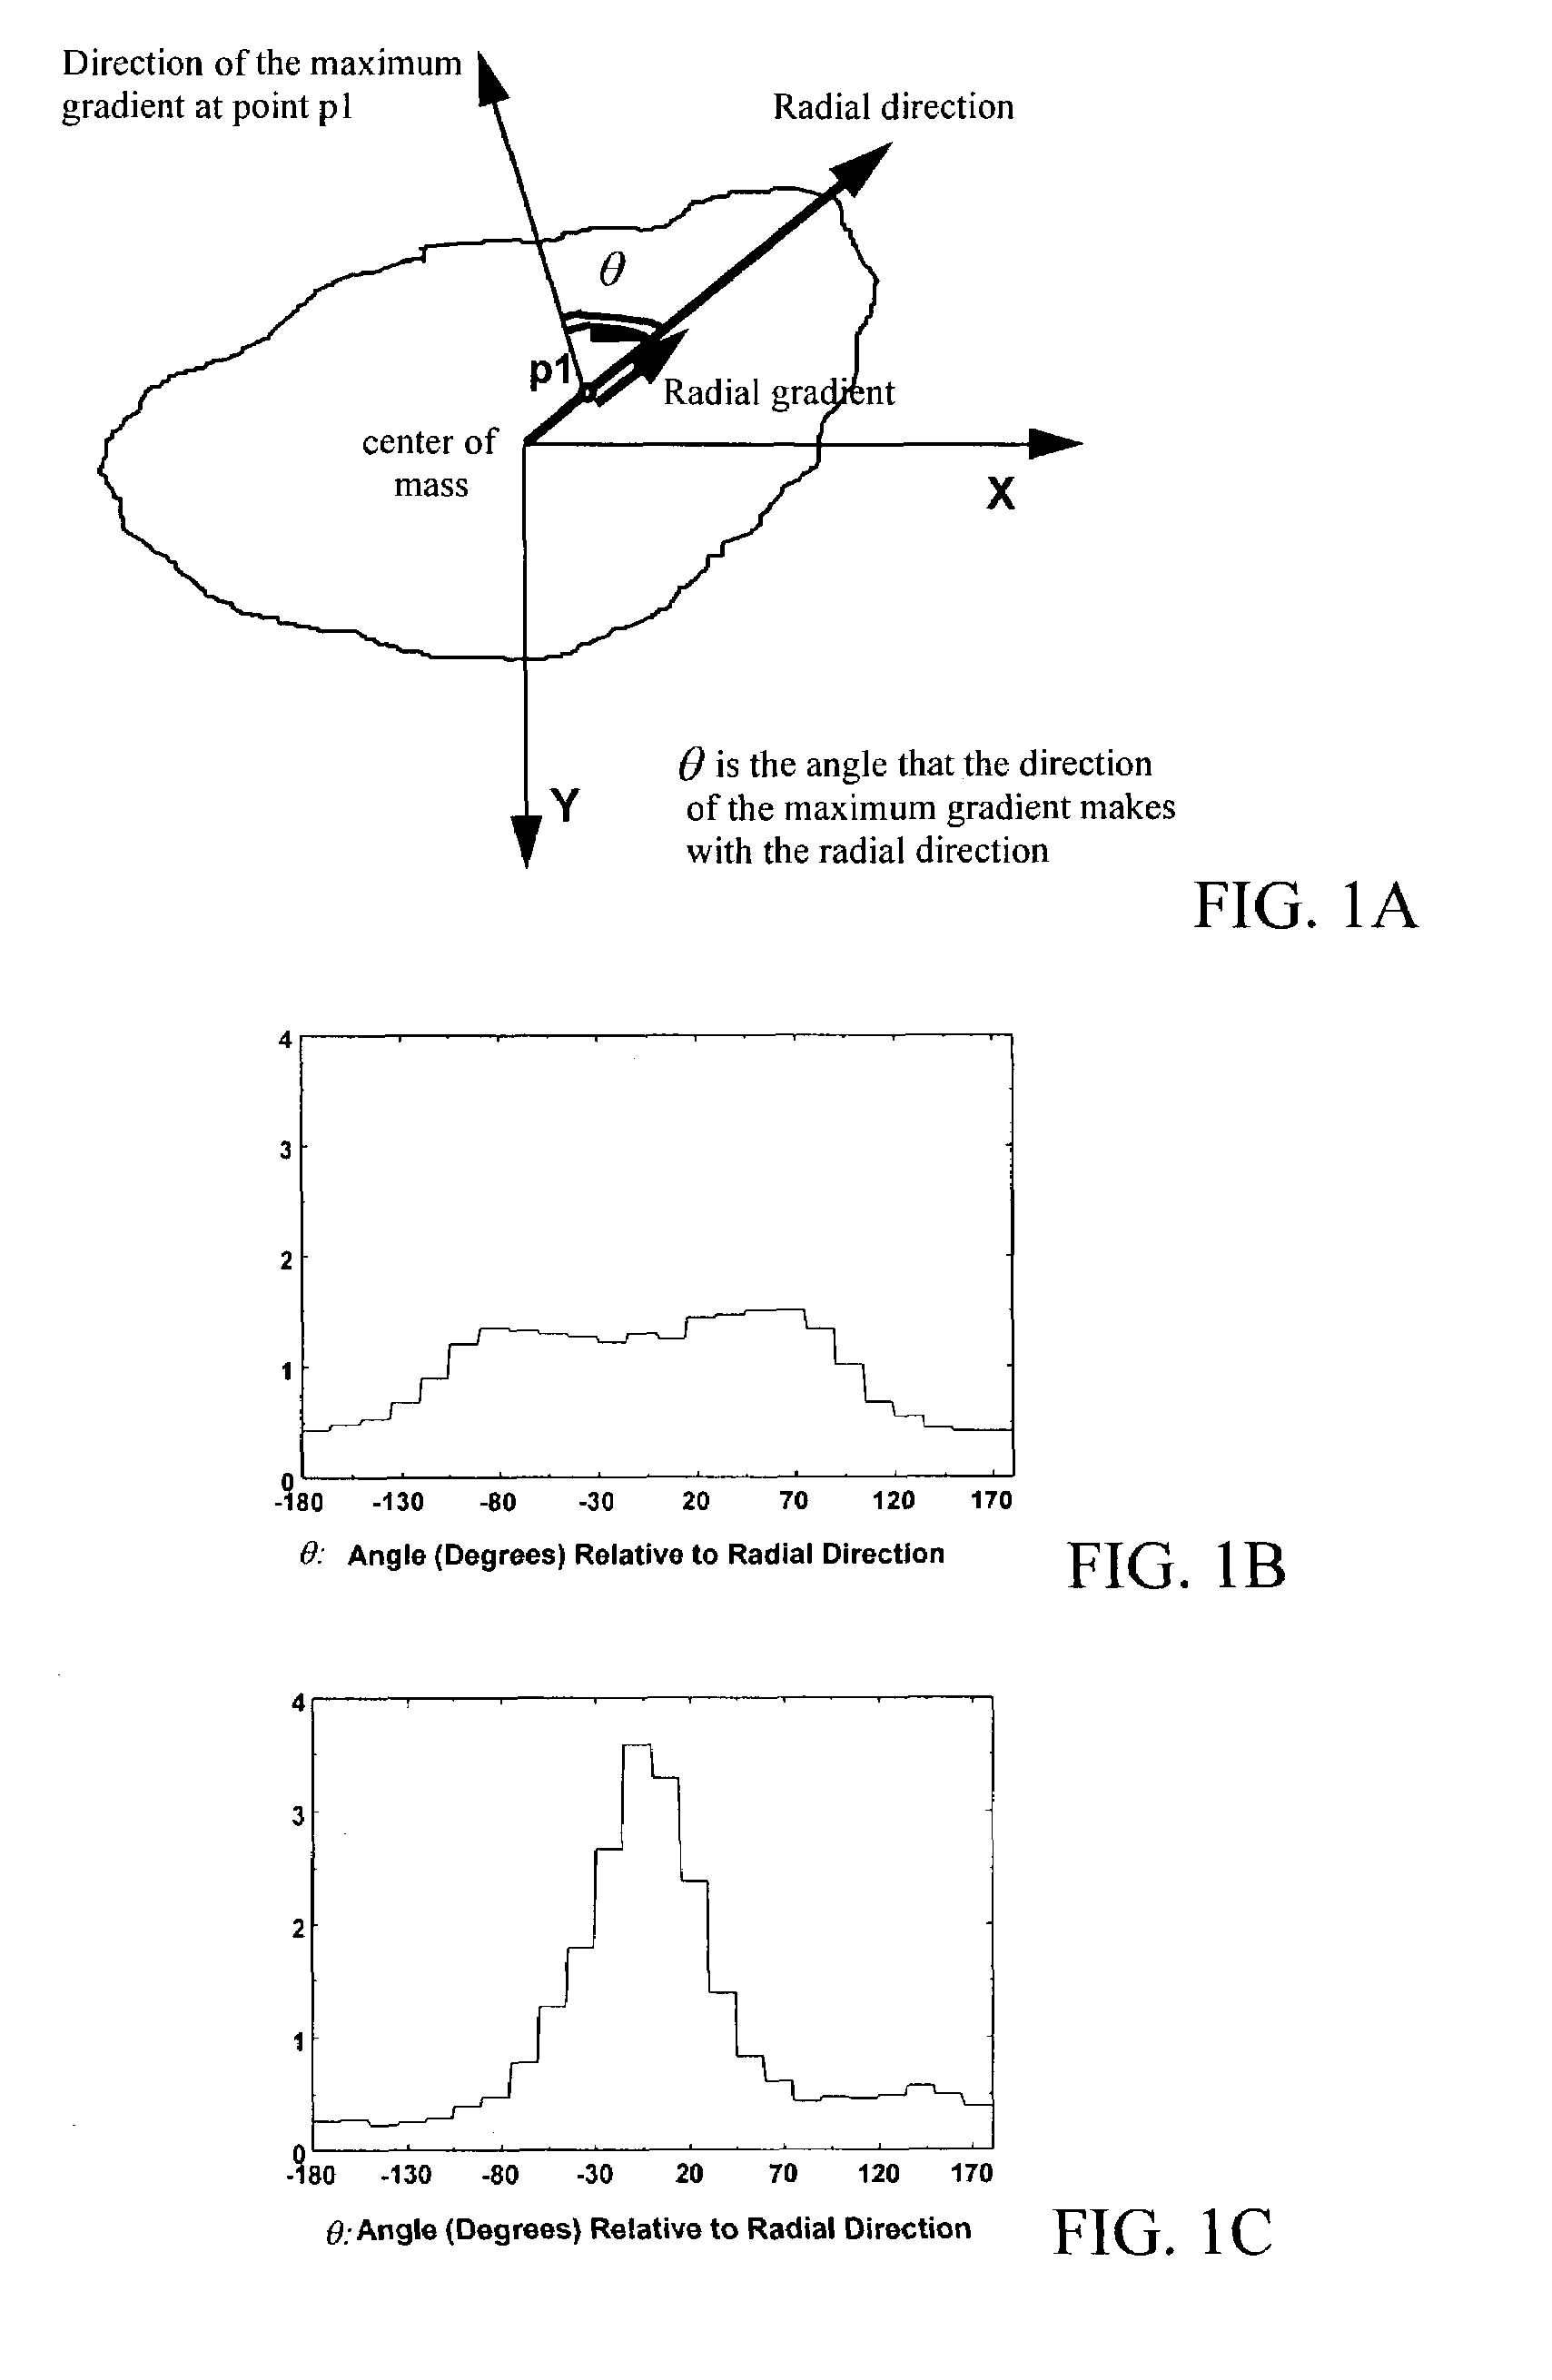 Method and system for risk-modulated diagnosis of disease